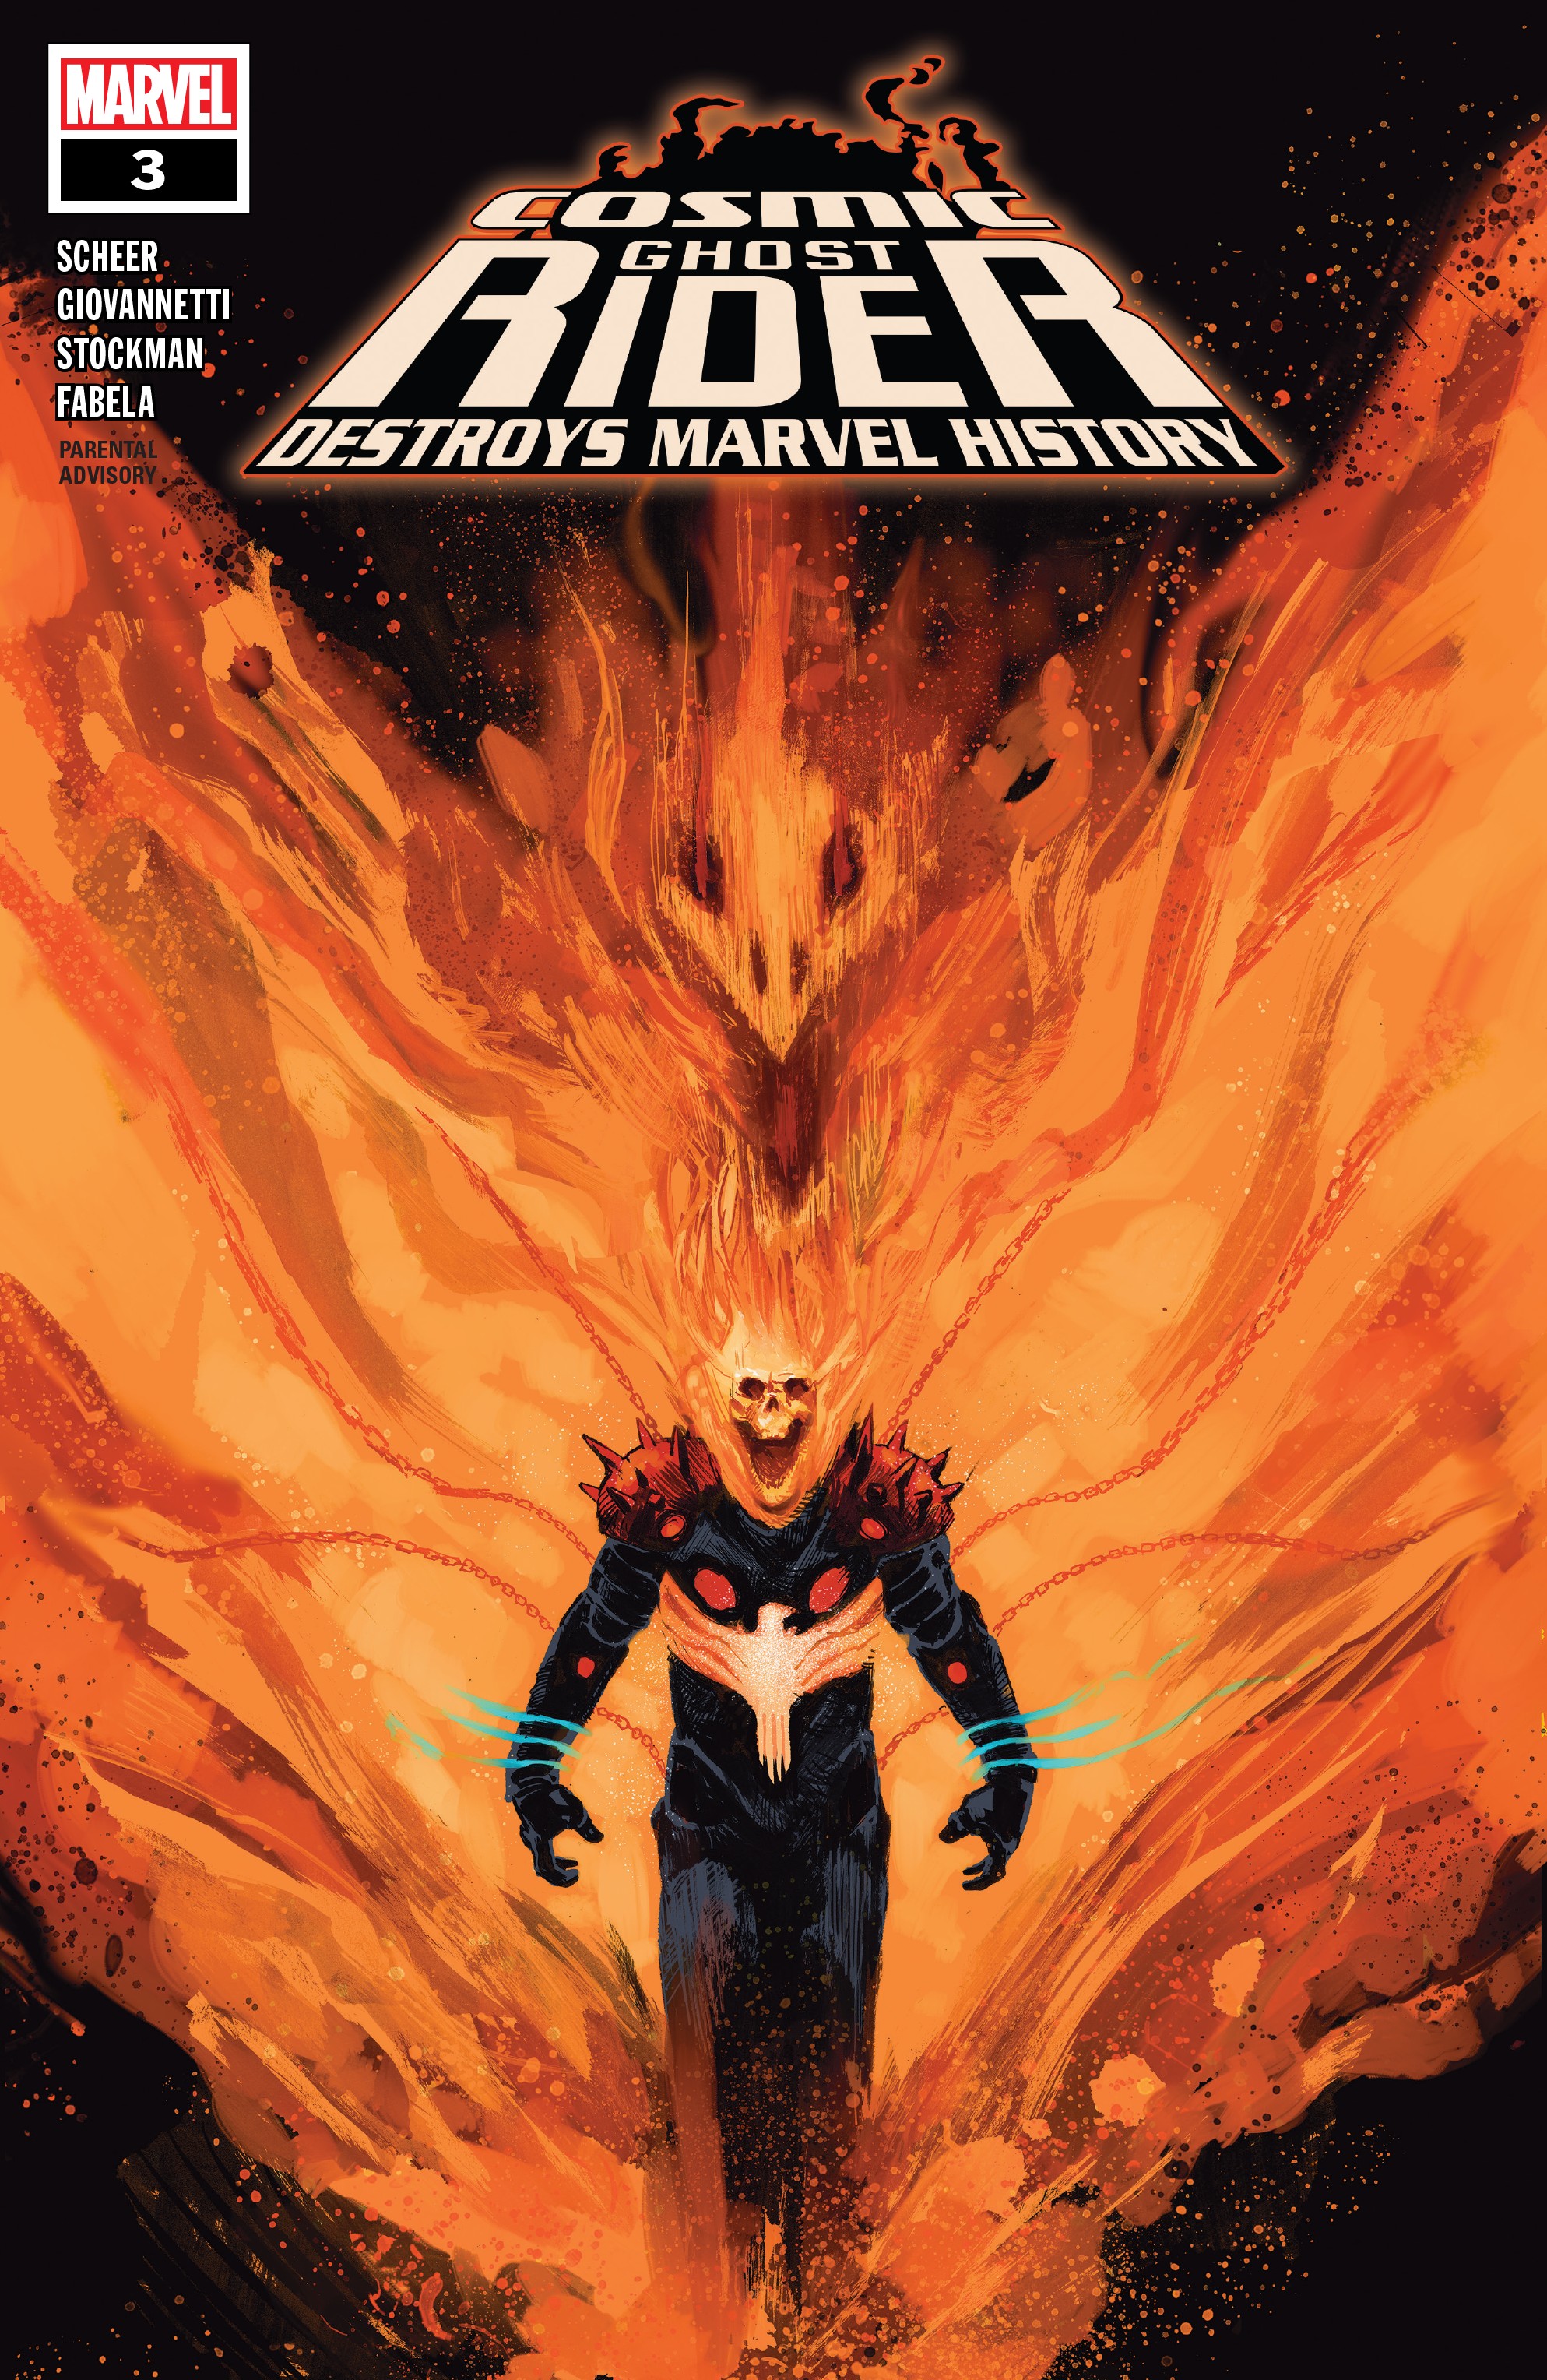 Cosmic Ghost Rider Destroys Marvel History Issue 3 | Read Cosmic Ghost Rider  Destroys Marvel History Issue 3 comic online in high quality. Read Full  Comic online for free - Read comics